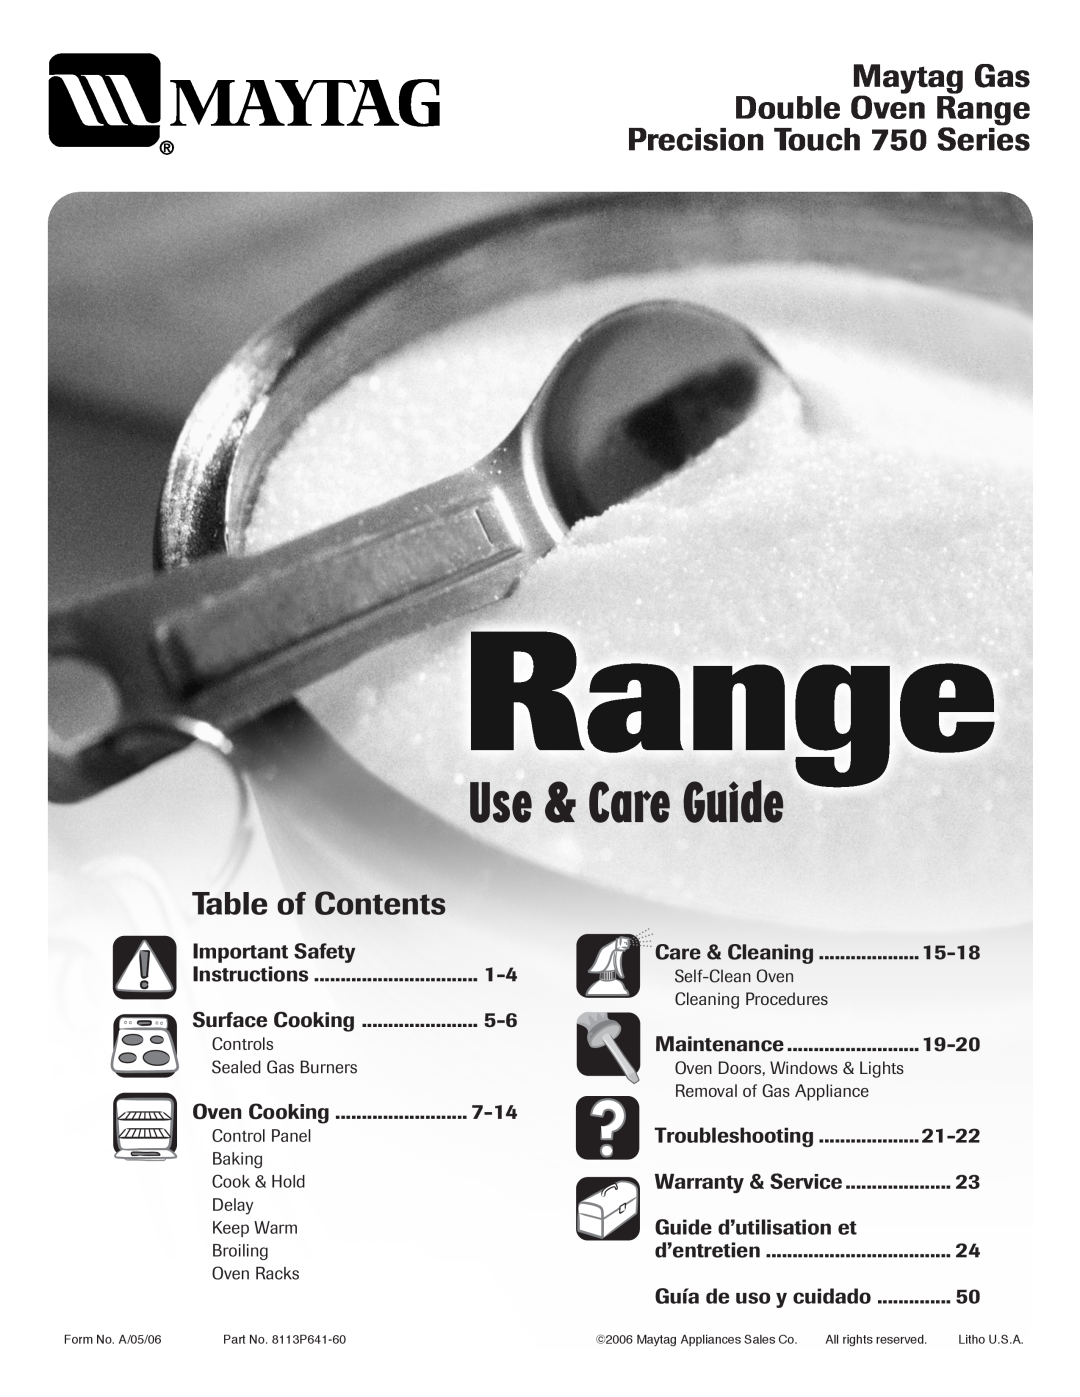 Maytag 8113P636-60, MER6765BAB, MER6765BAW, MER6765BAQ, MER6765BAS manual Use & Care Guide, Table of Contents 